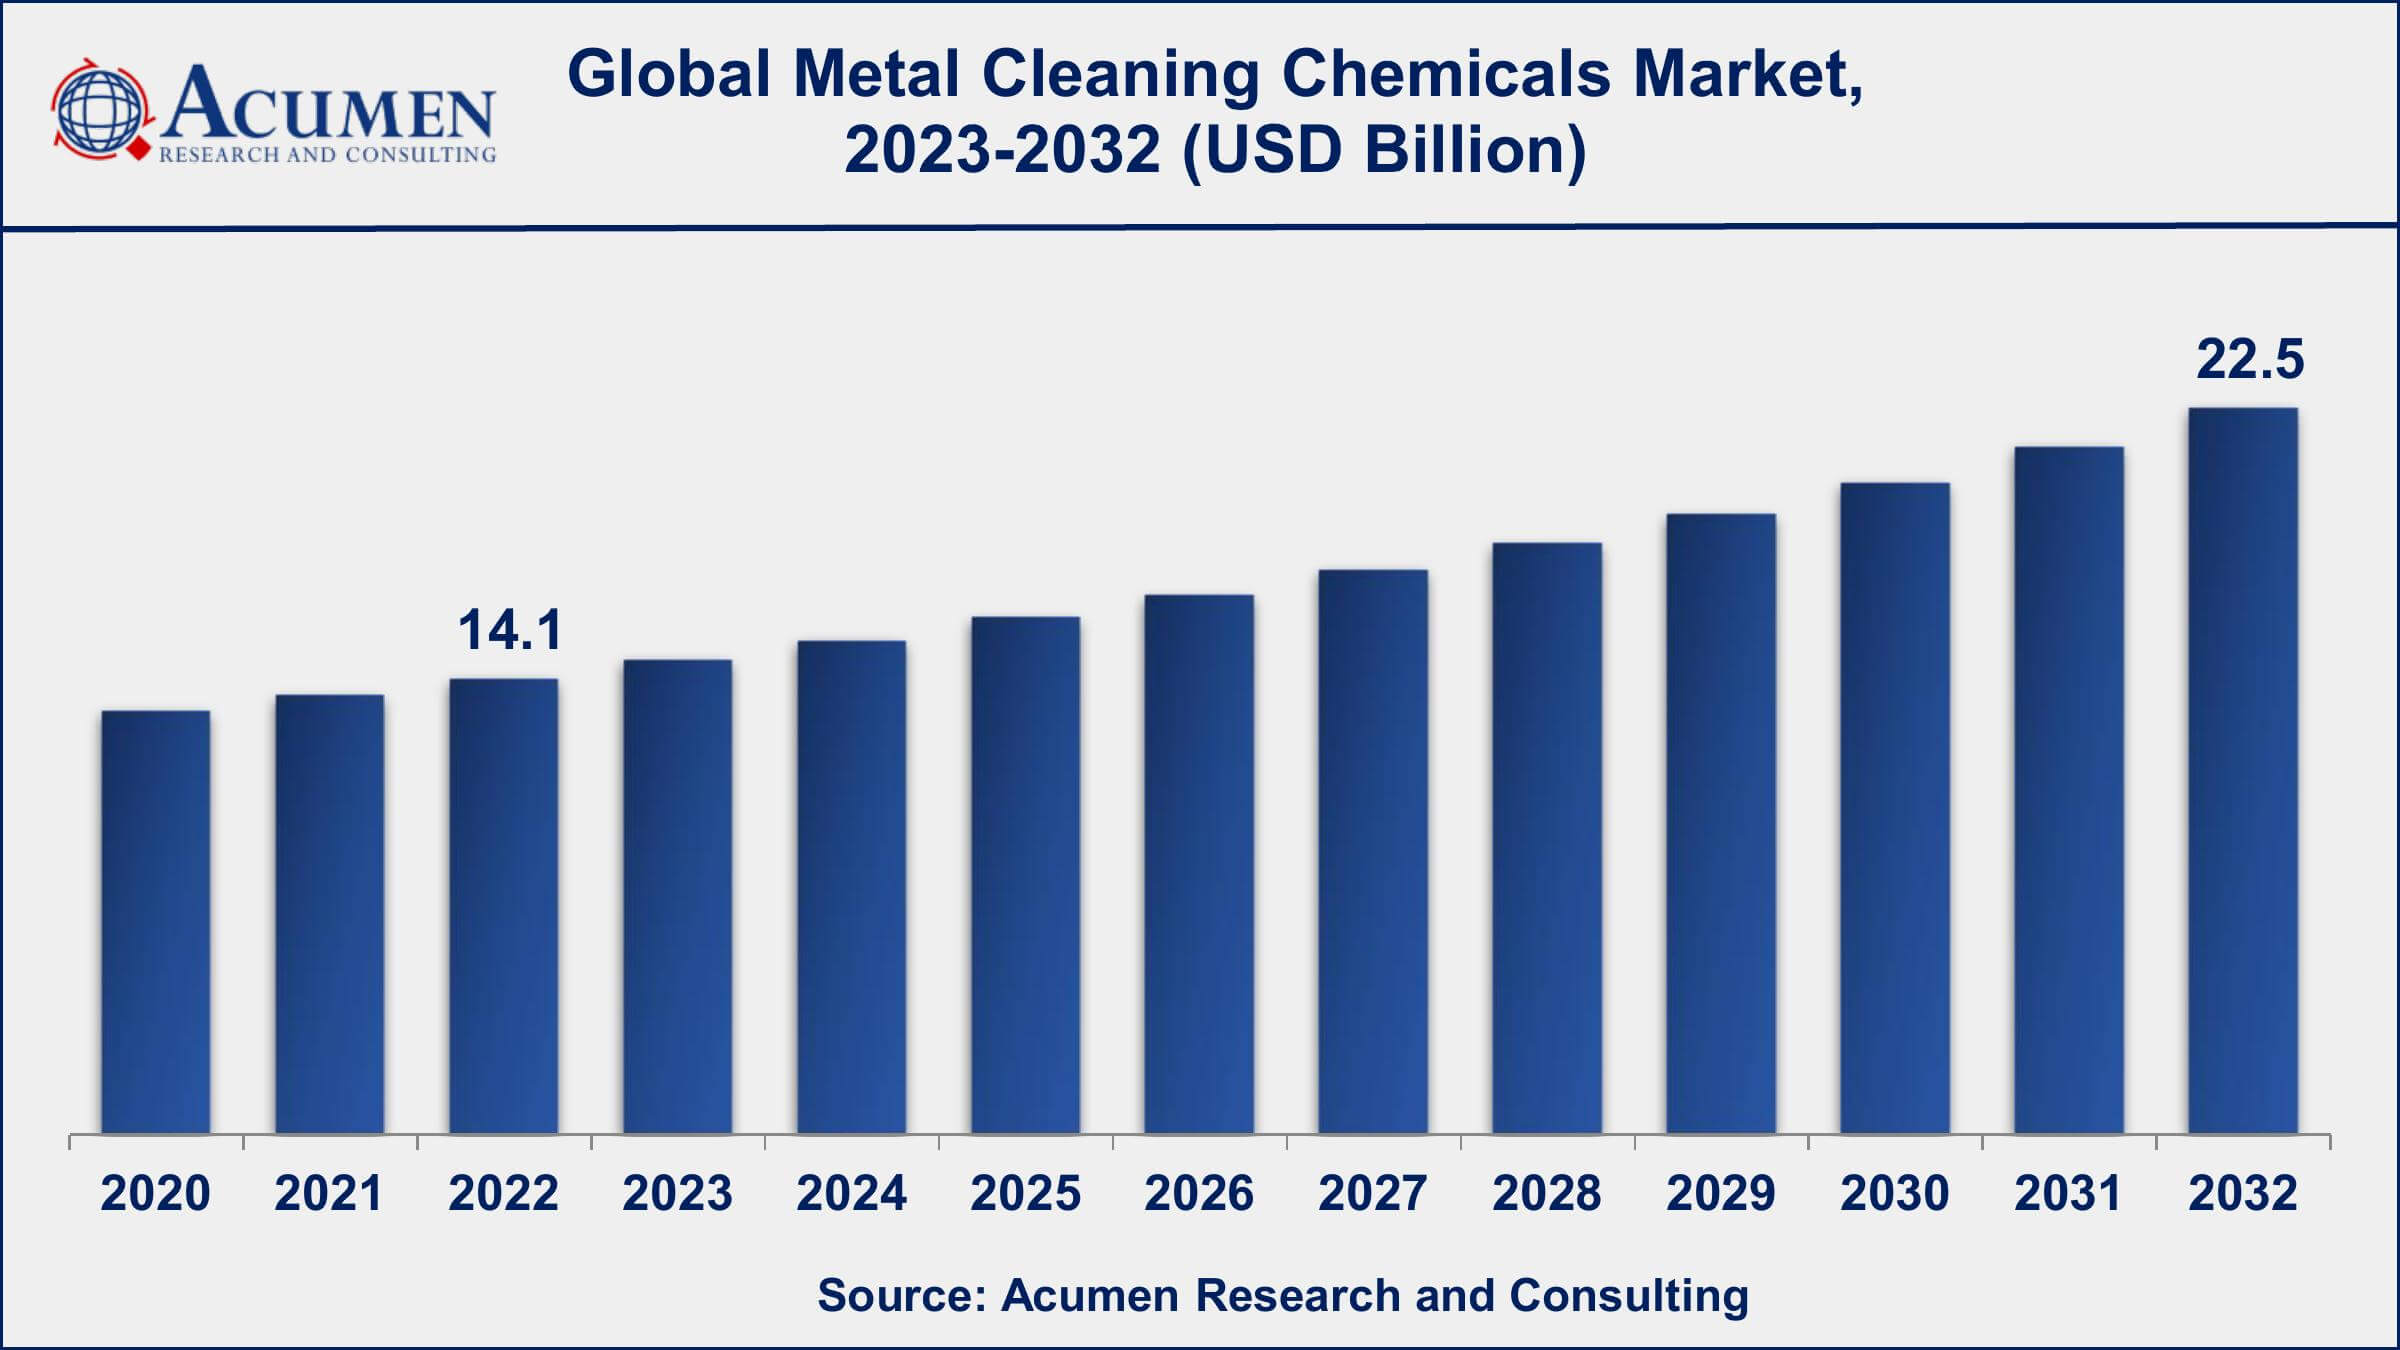 Global Metal Cleaning Chemicals Market Dynamics